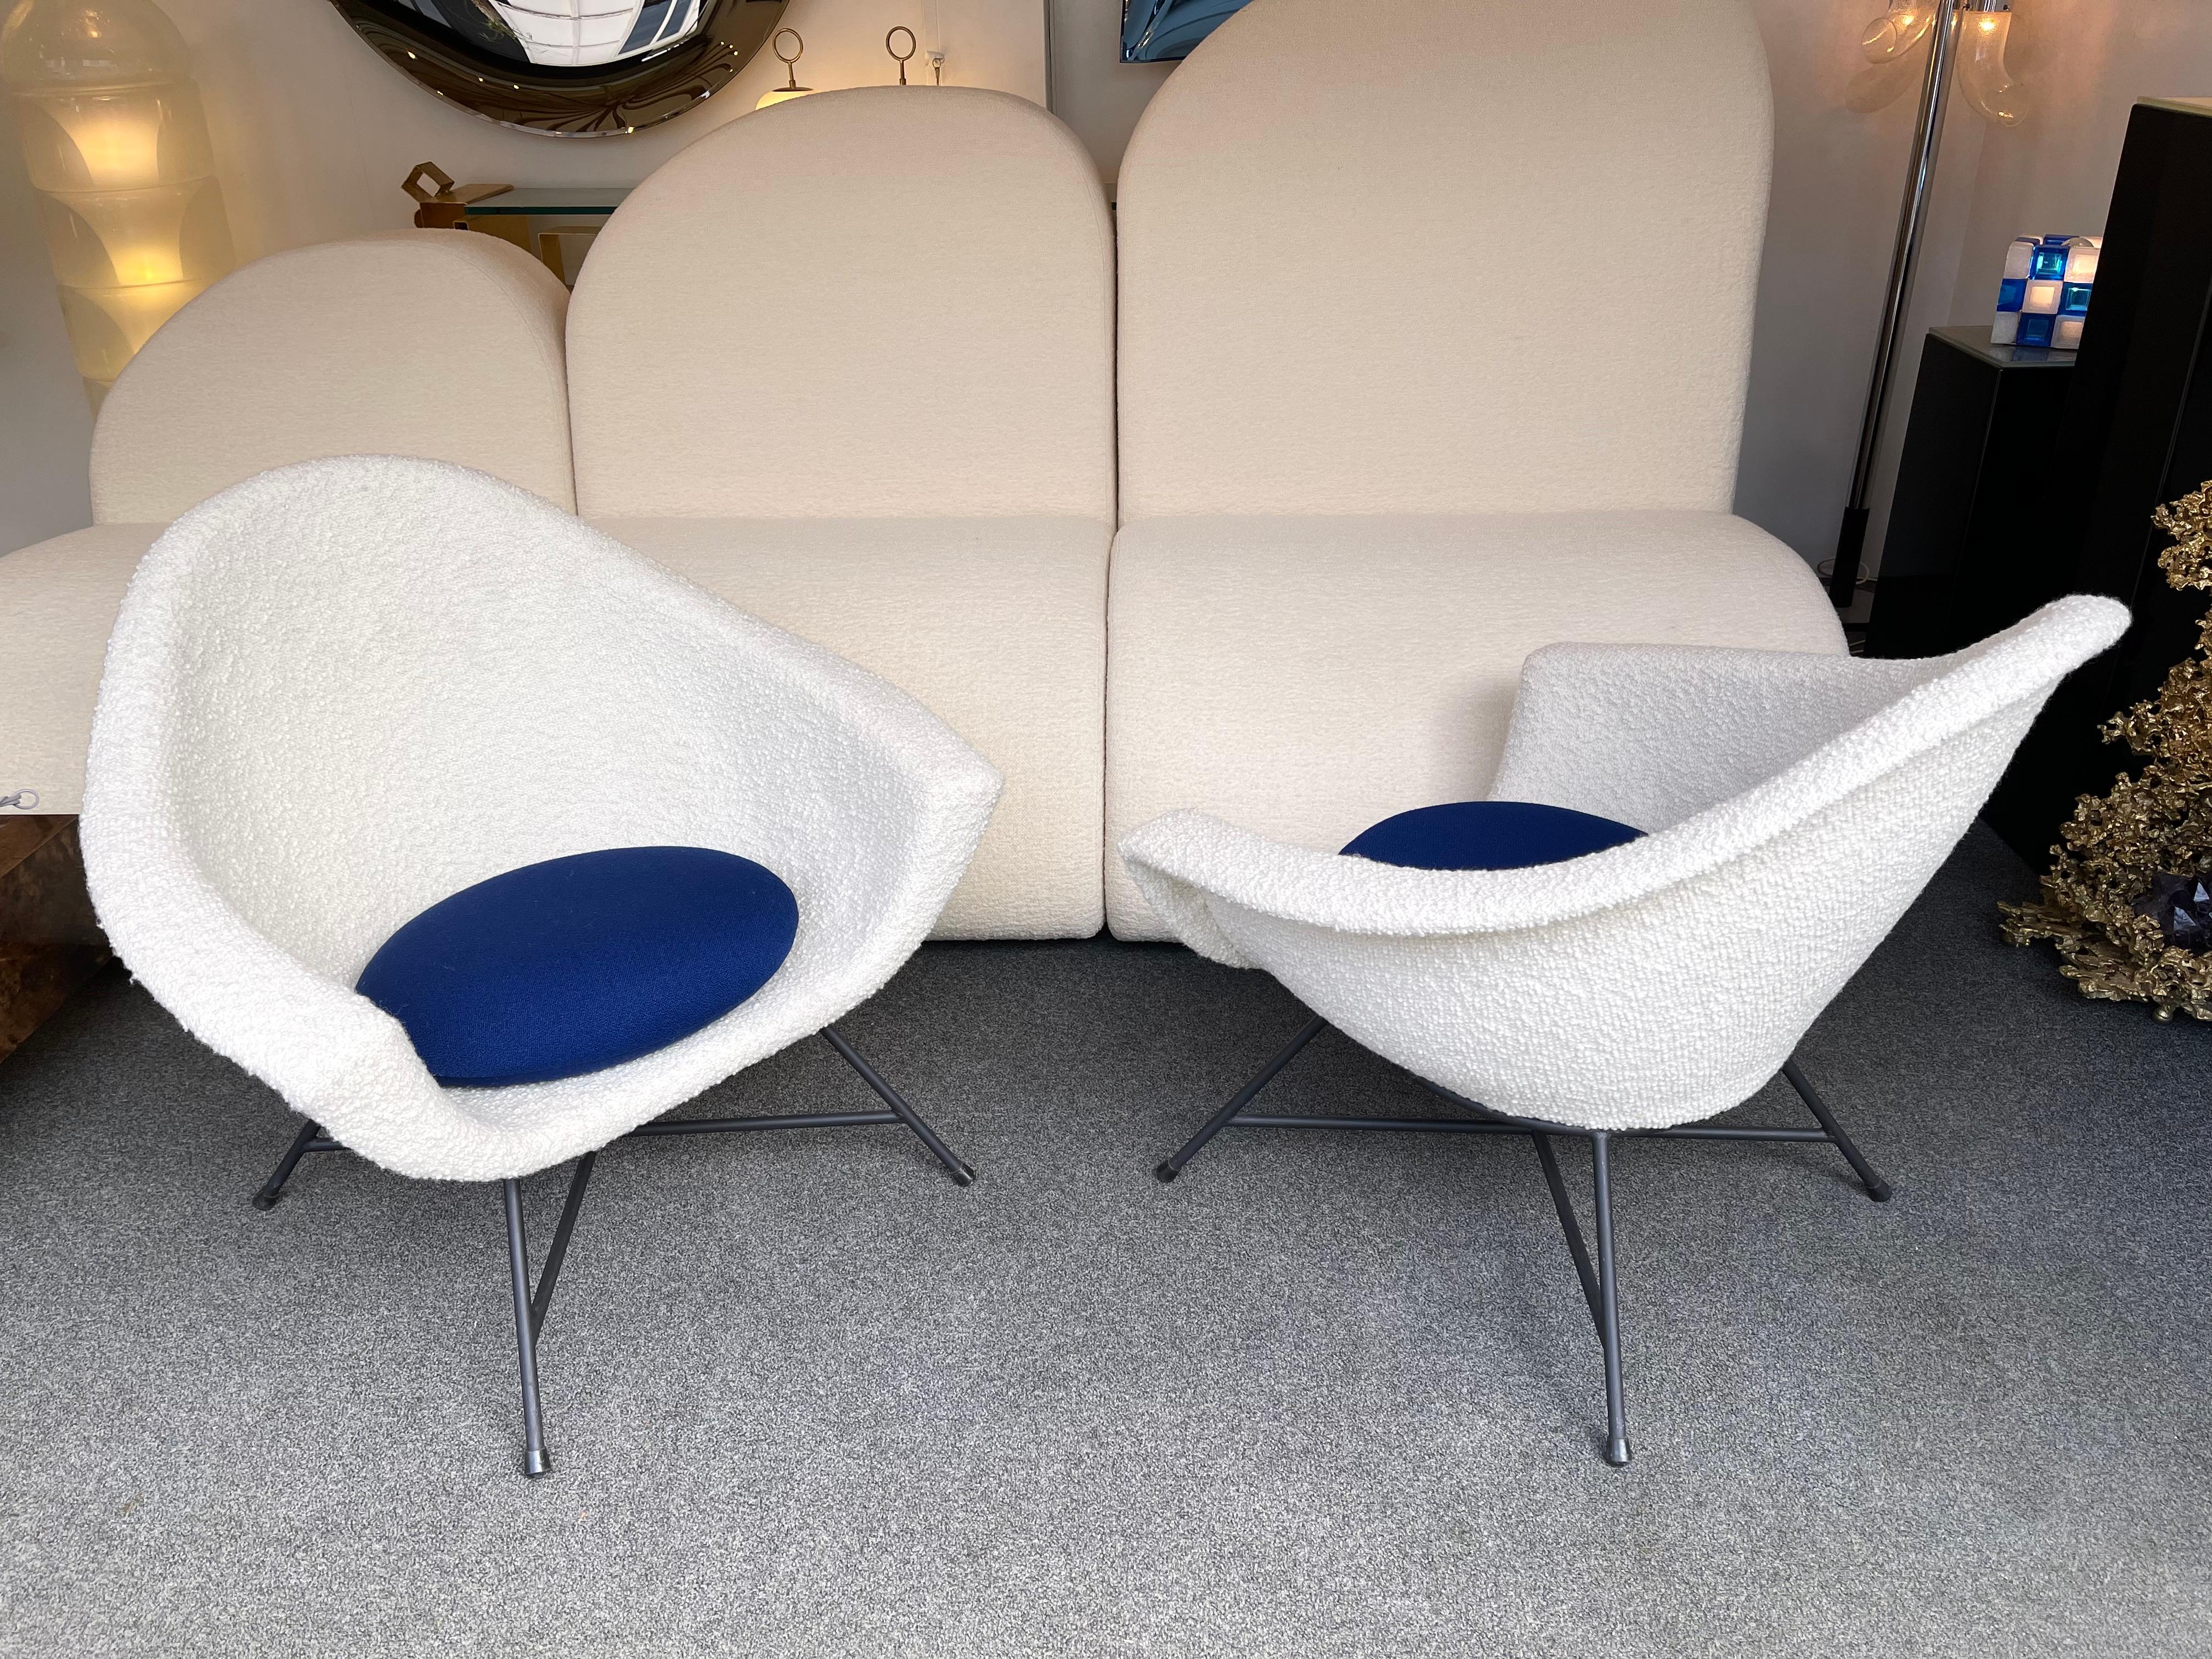 Mid-Century Modern Pair of Armchairs 58 by Dangles & Defrance for Burov. France, 1950s For Sale